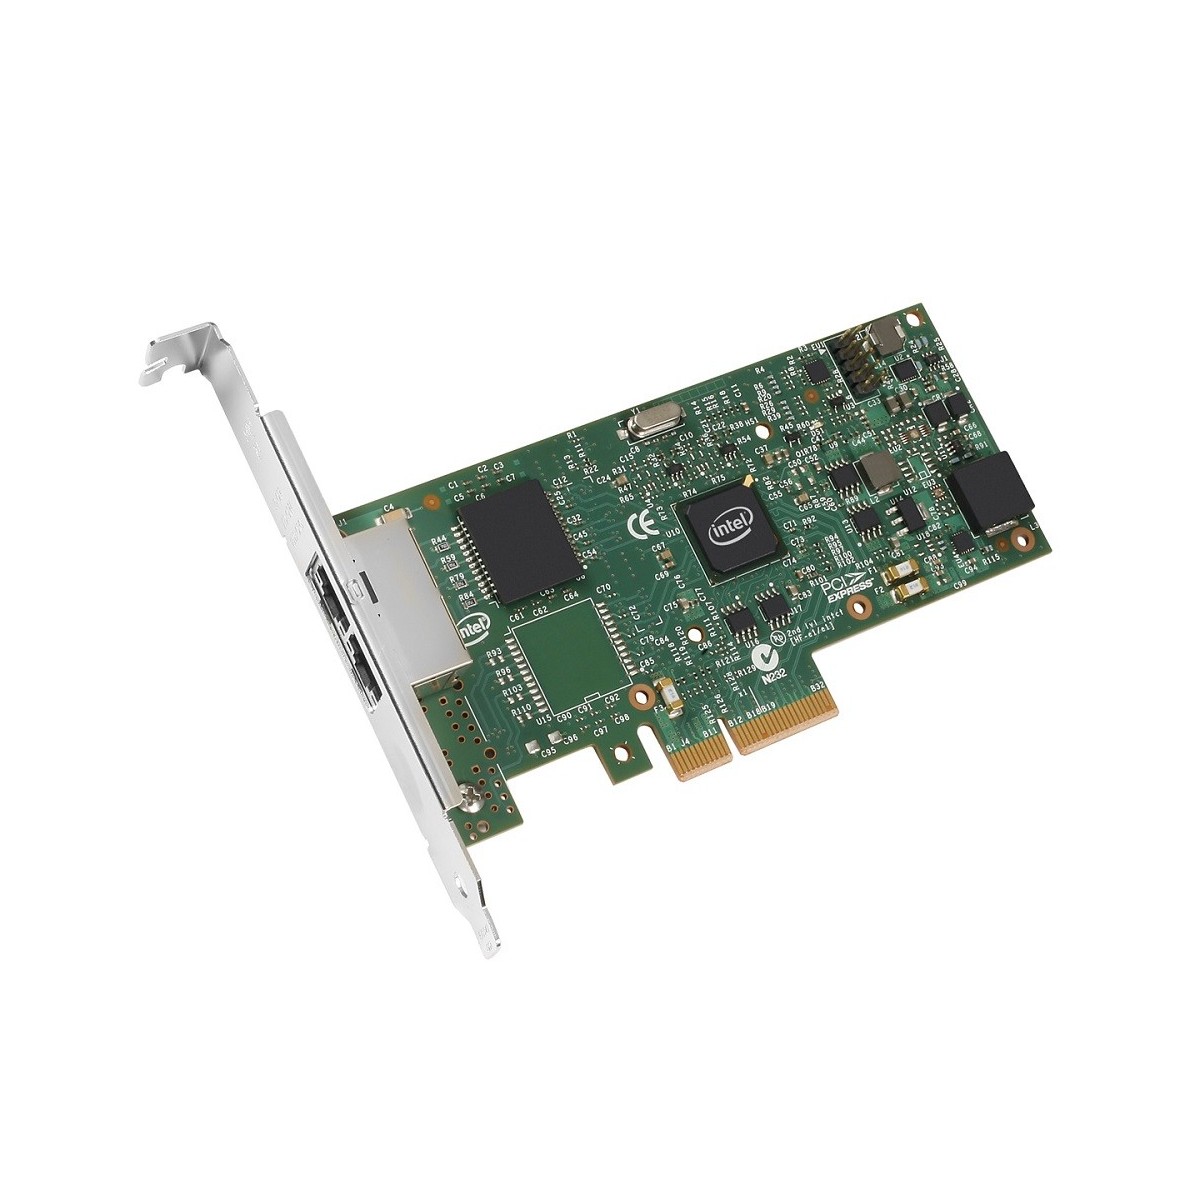 Intel I350F4BLK - Internal - Wired - PCI Express - Ethernet - 1000 Mbit/s - Green